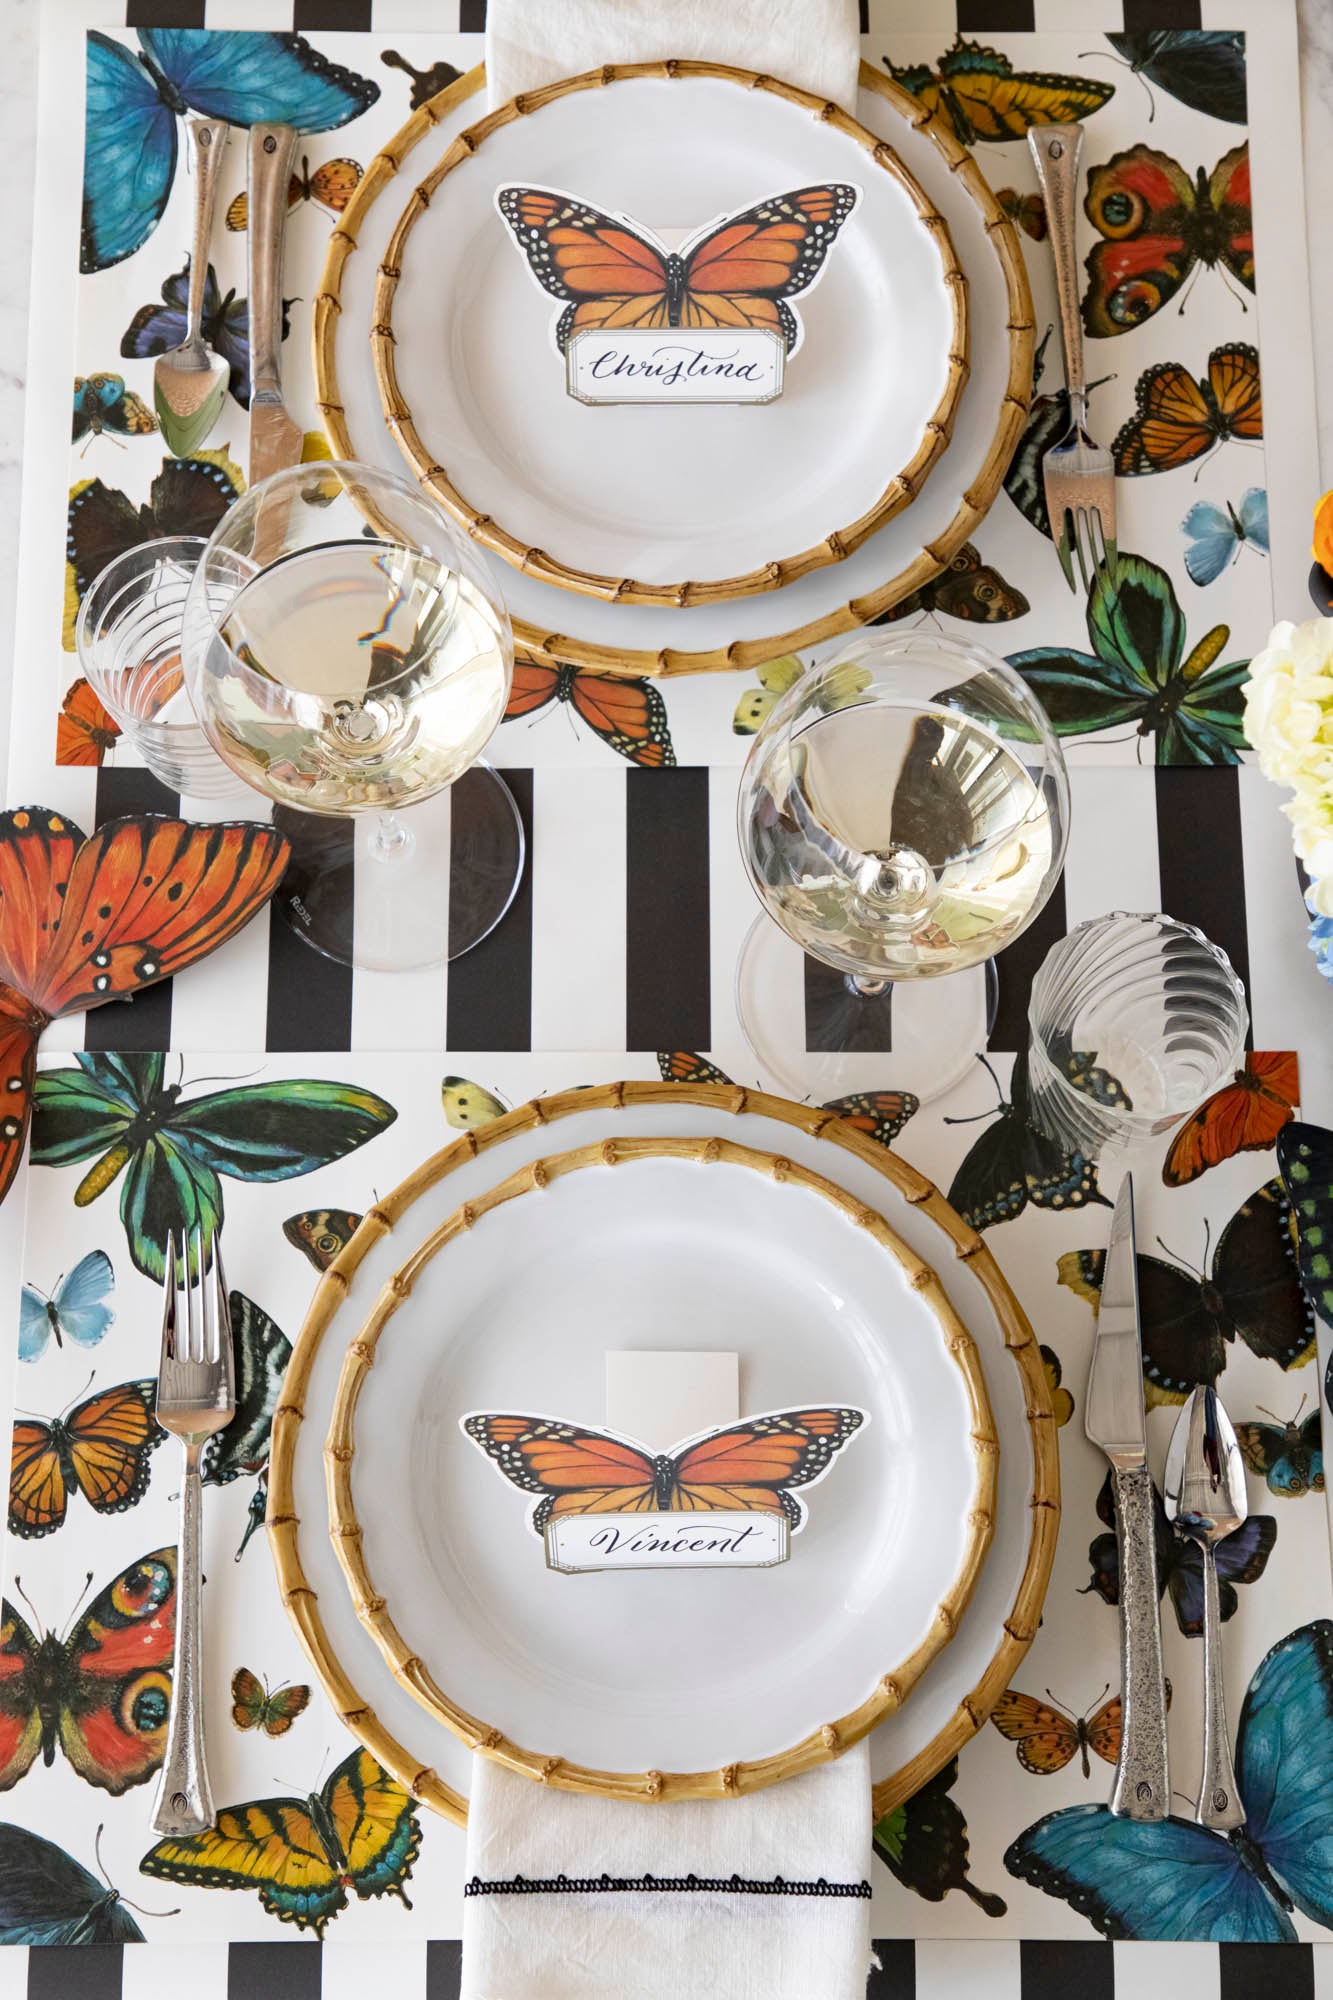 A variety of colorful butterflies displayed against a light background on Hester &amp; Cook&